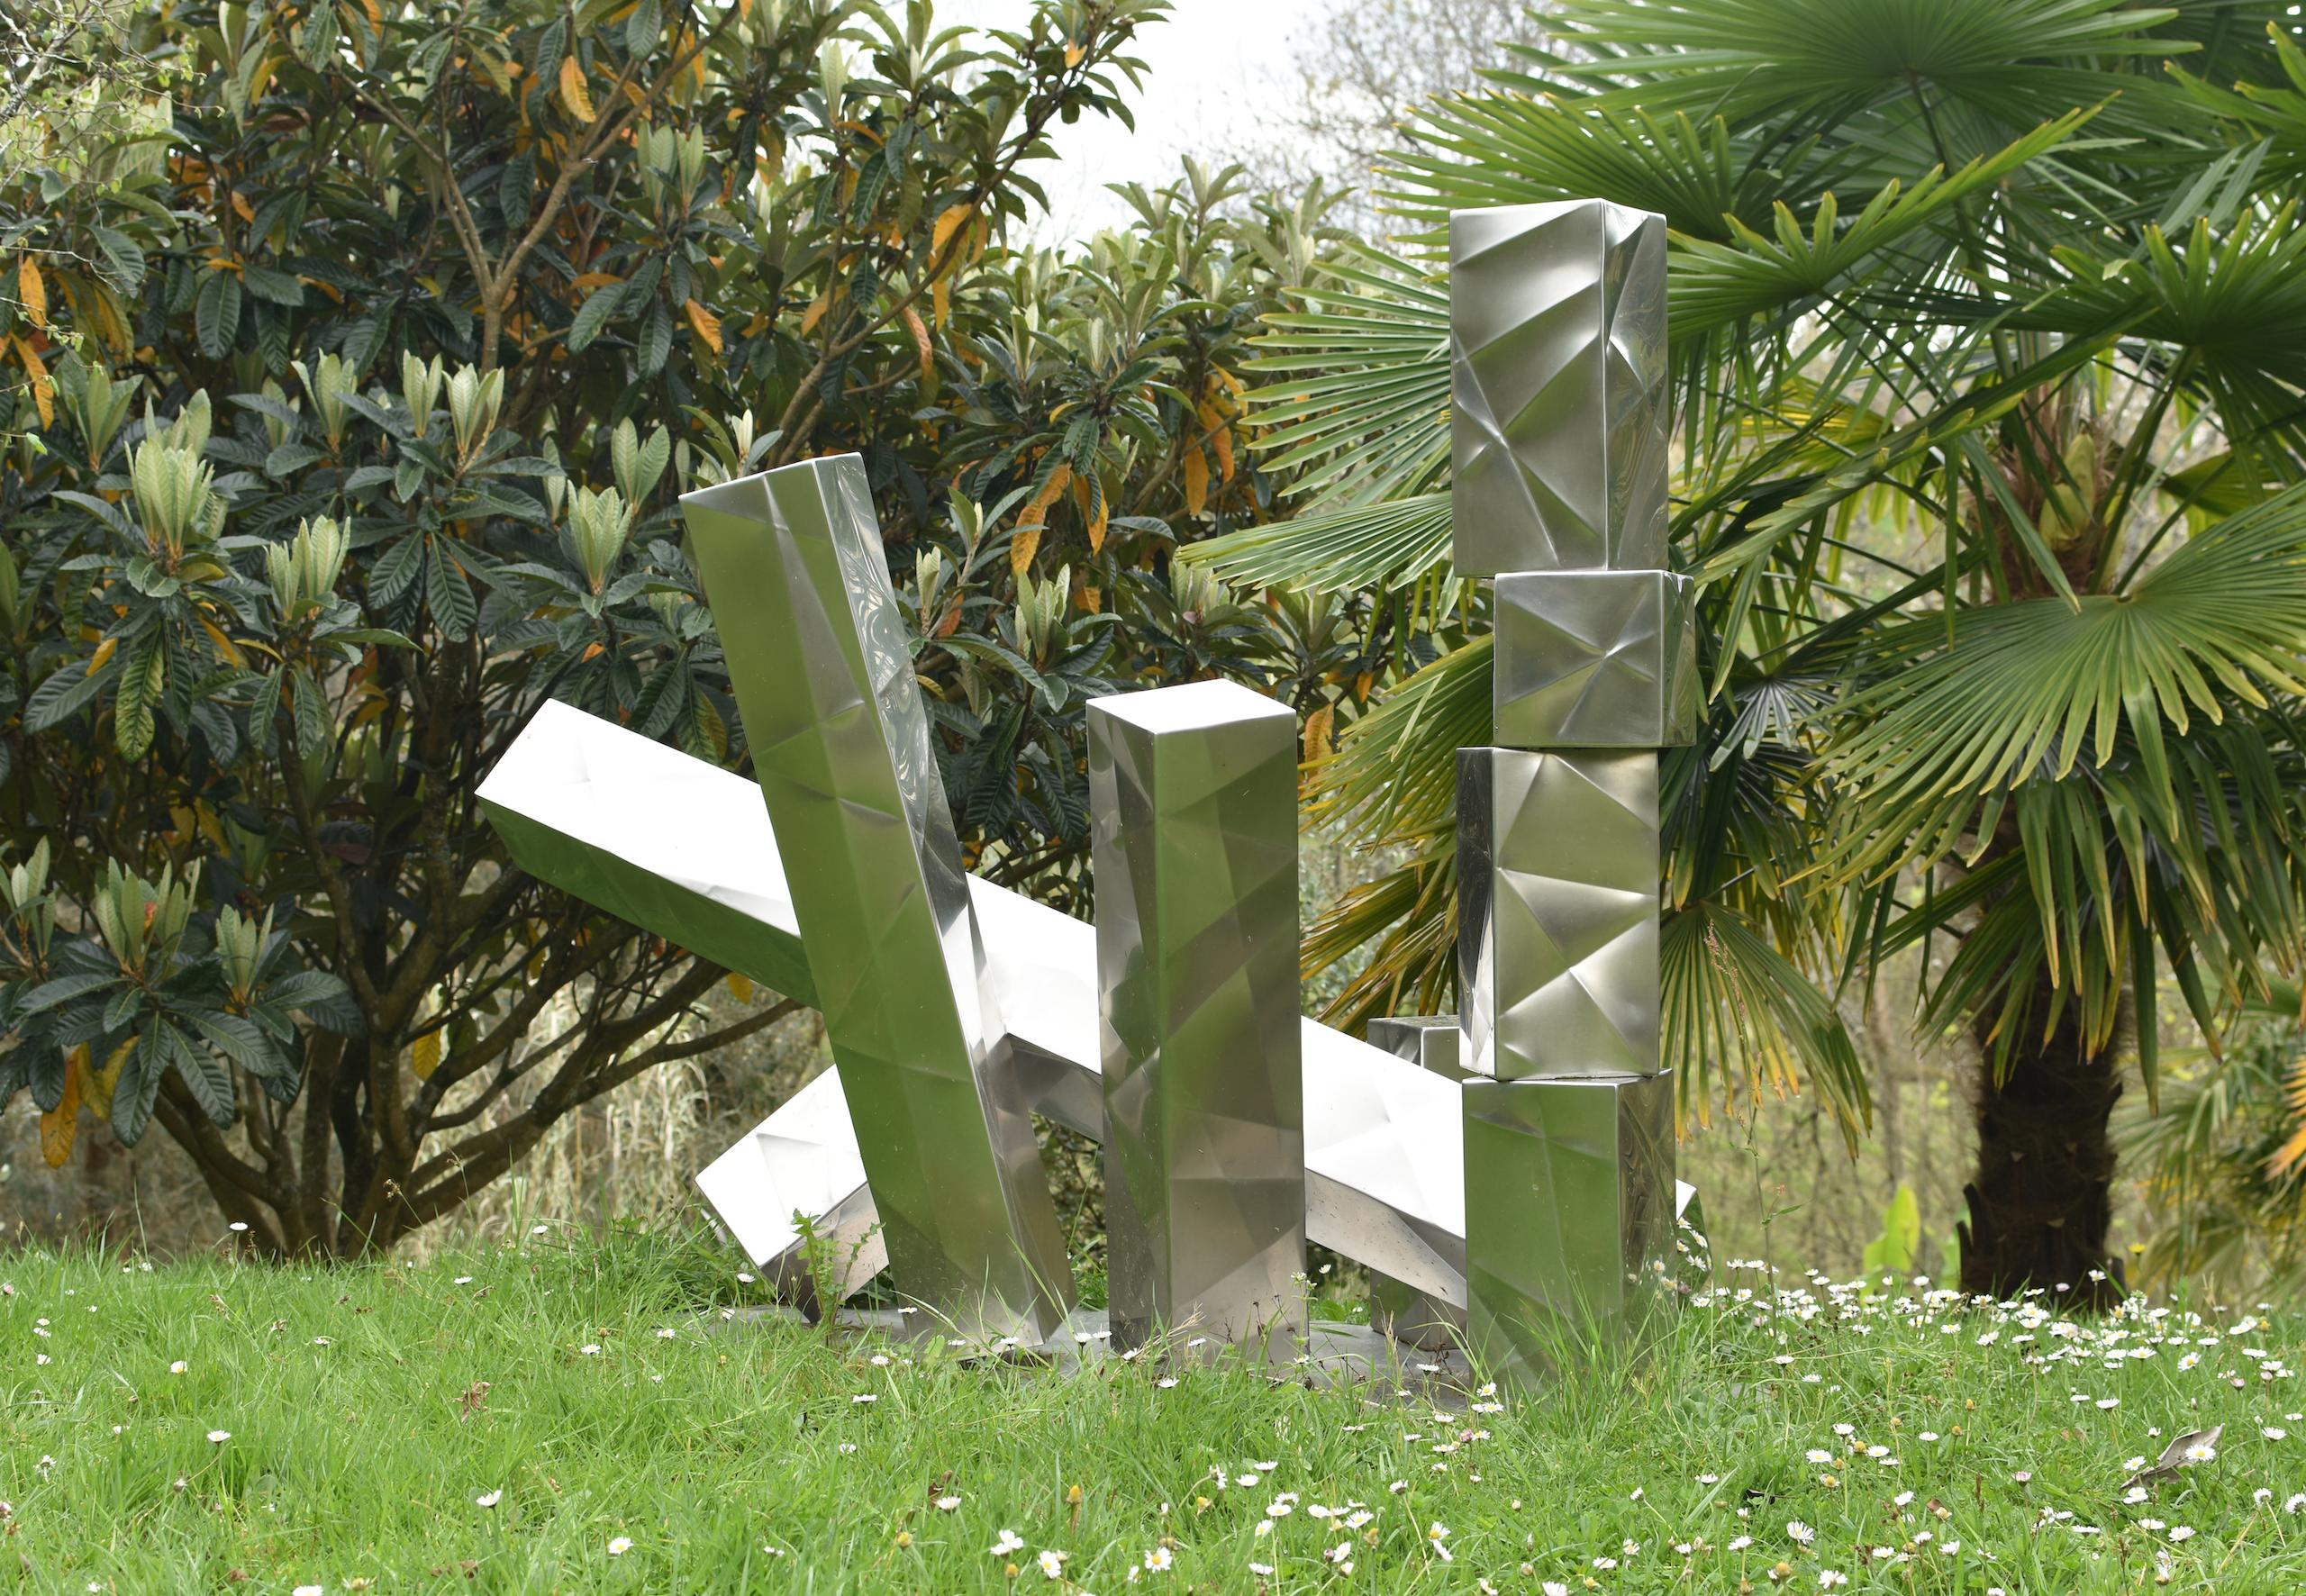 City is a unique matt polished stainless steel sculpture and stainless steel sheet base by contemporary artist Franck K, dimensions are 131 × 190 × 90 cm (51.6 × 74.8 × 35.4 in). 
The sculpture is signed and comes with a certificate of